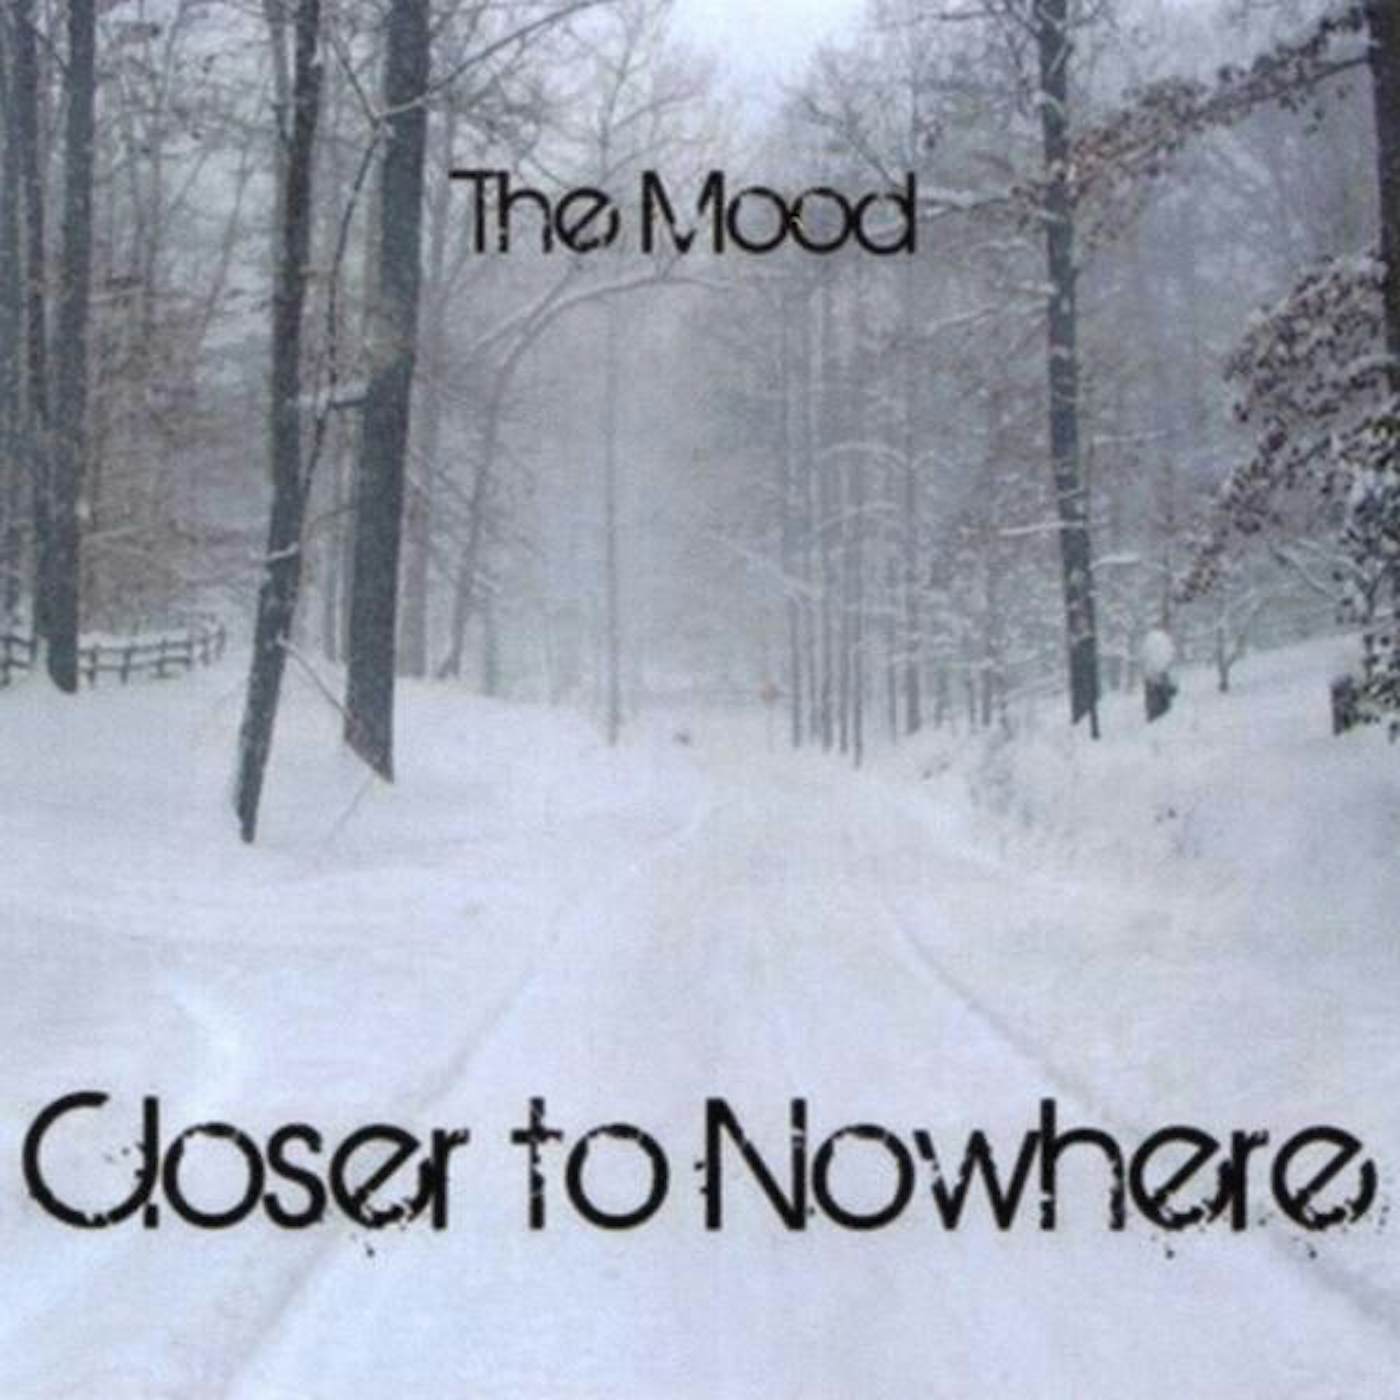 Mood CLOSER TO NOWHERE CD